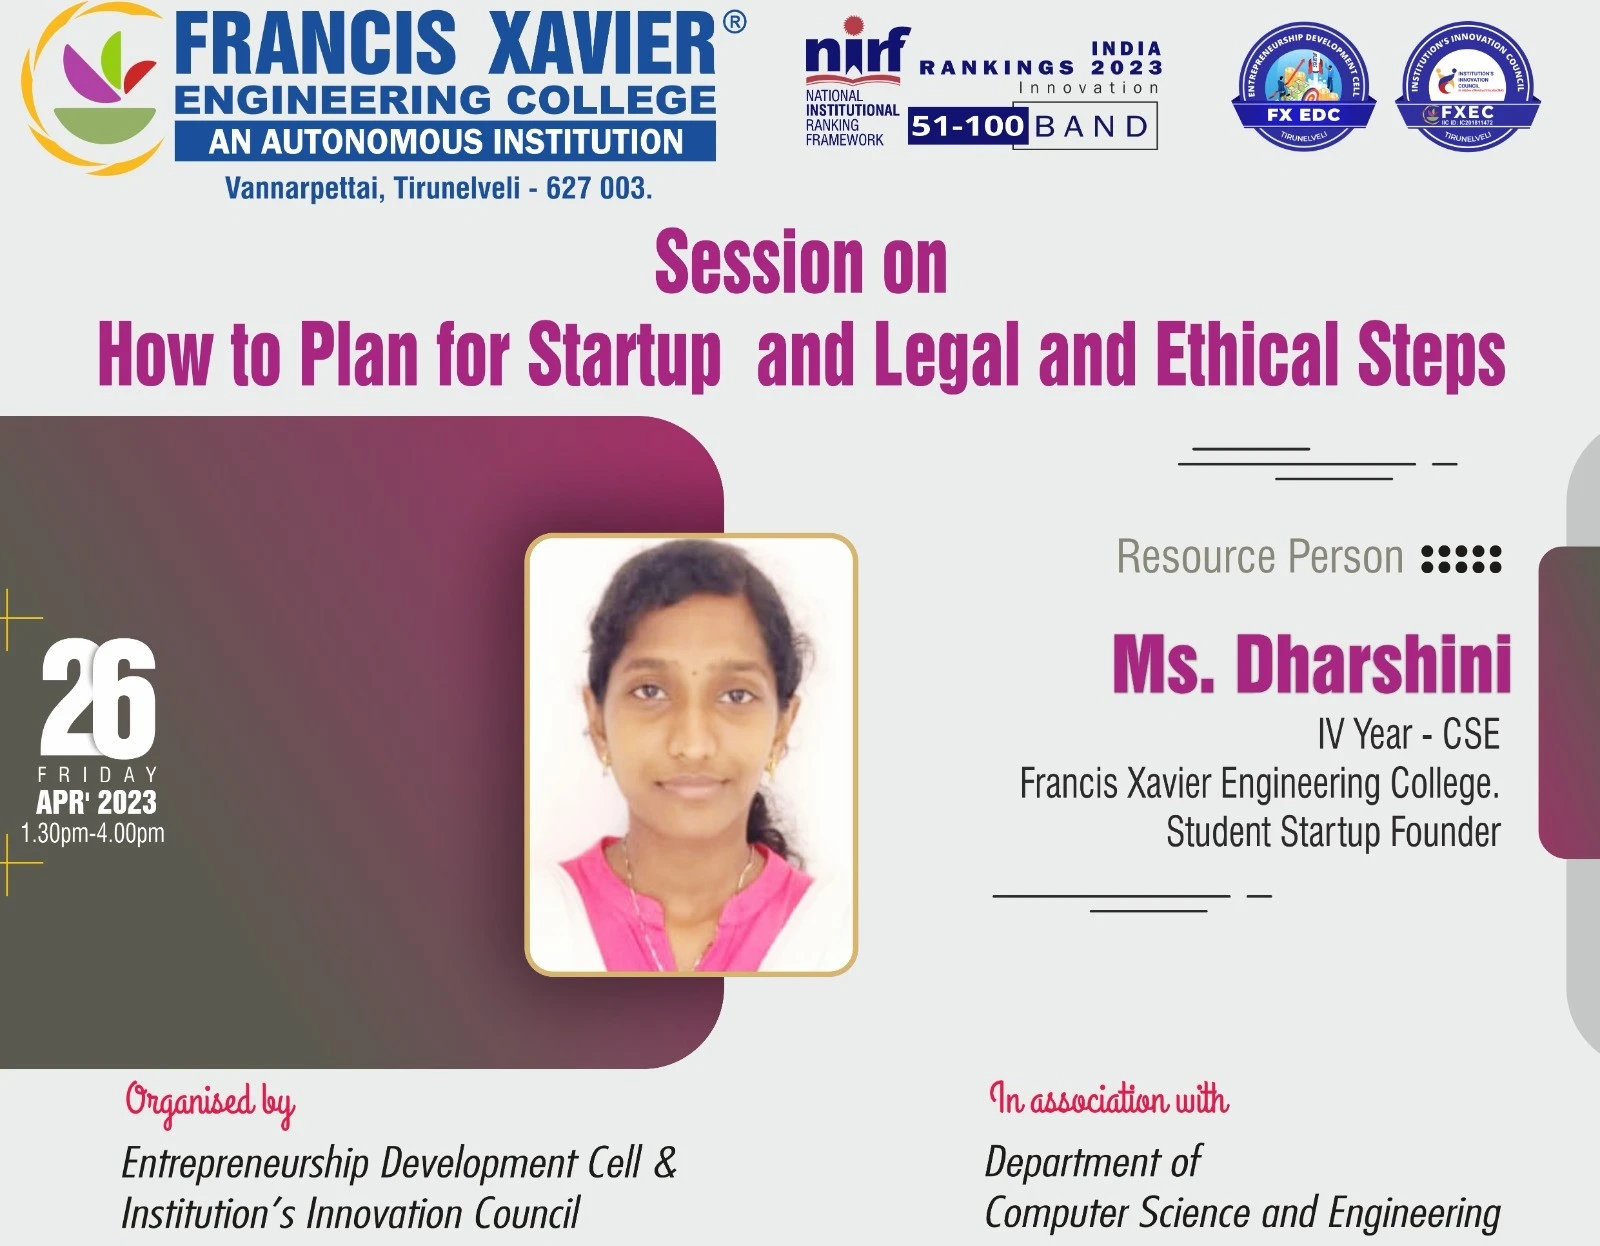 How to Plan for startup and legal and ethical steps